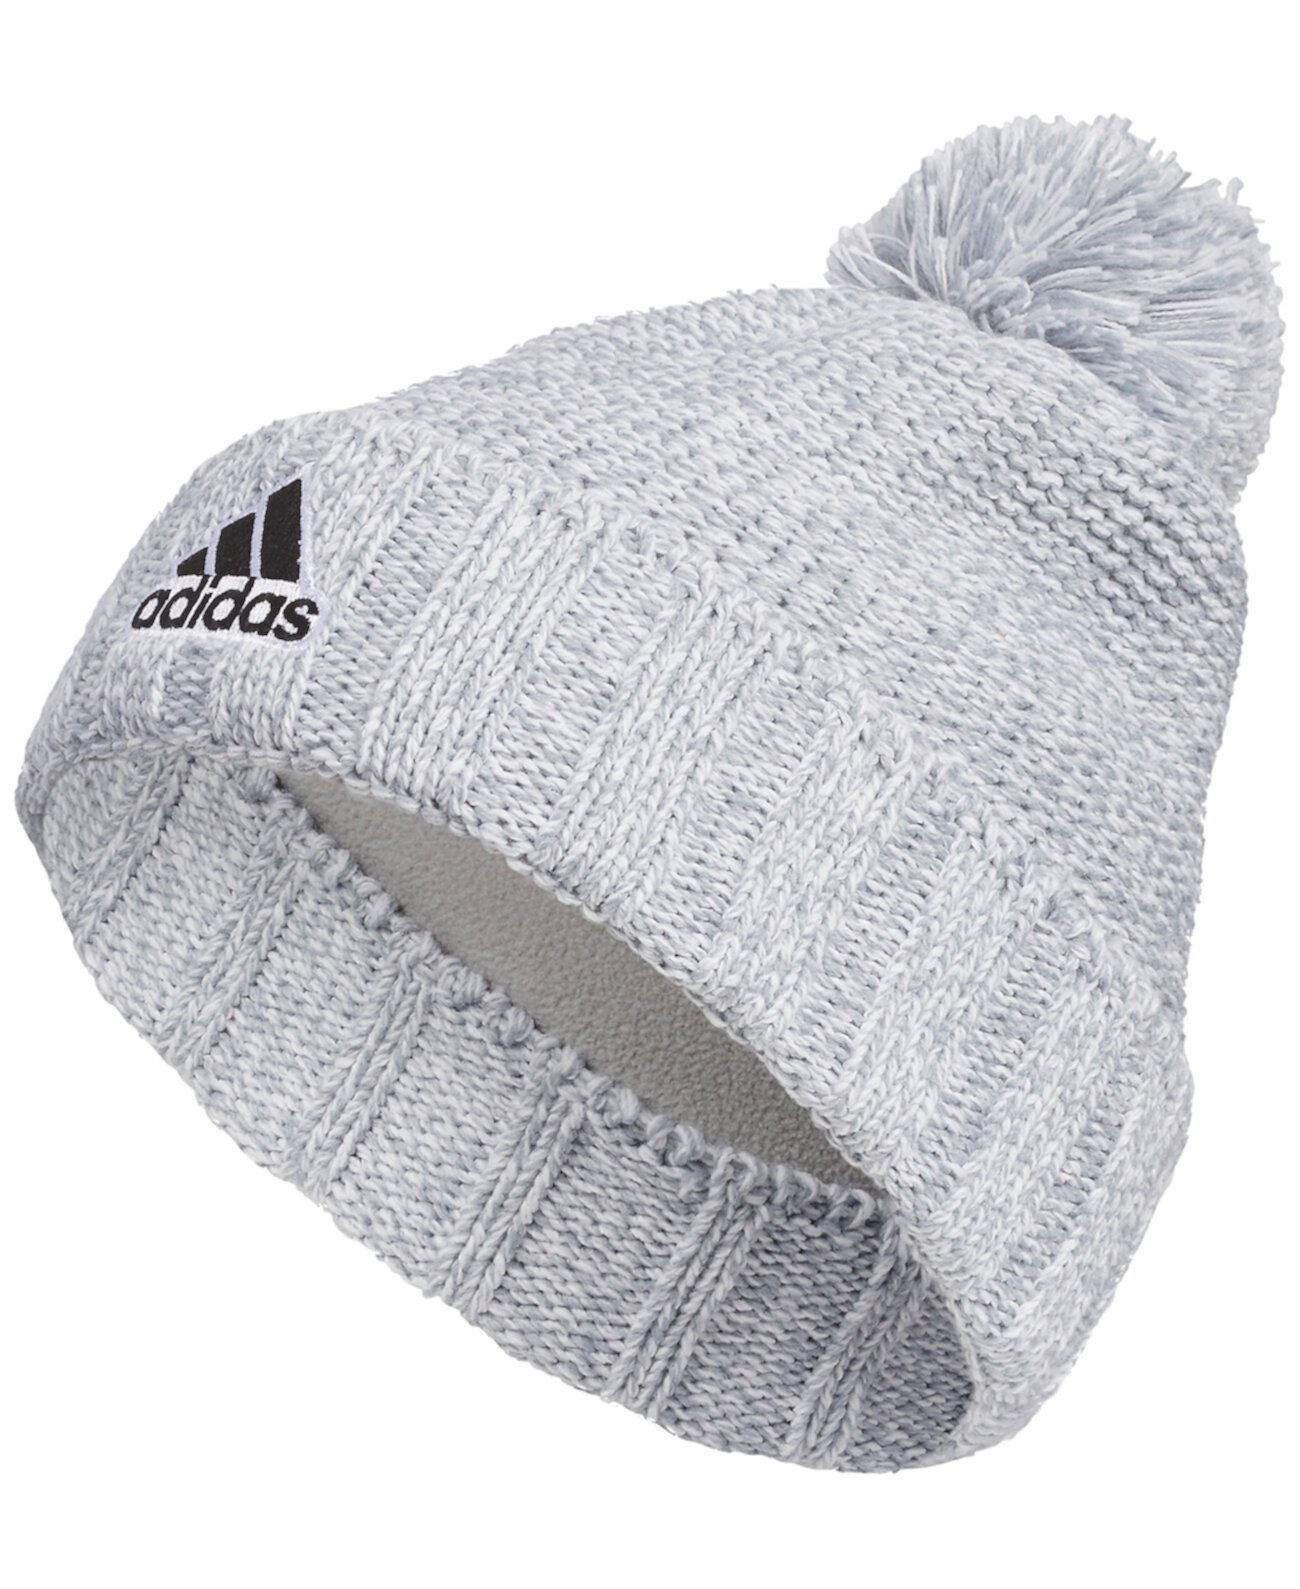 Men's Tall Fit Recon Ballie 3 Knit Hat Adidas